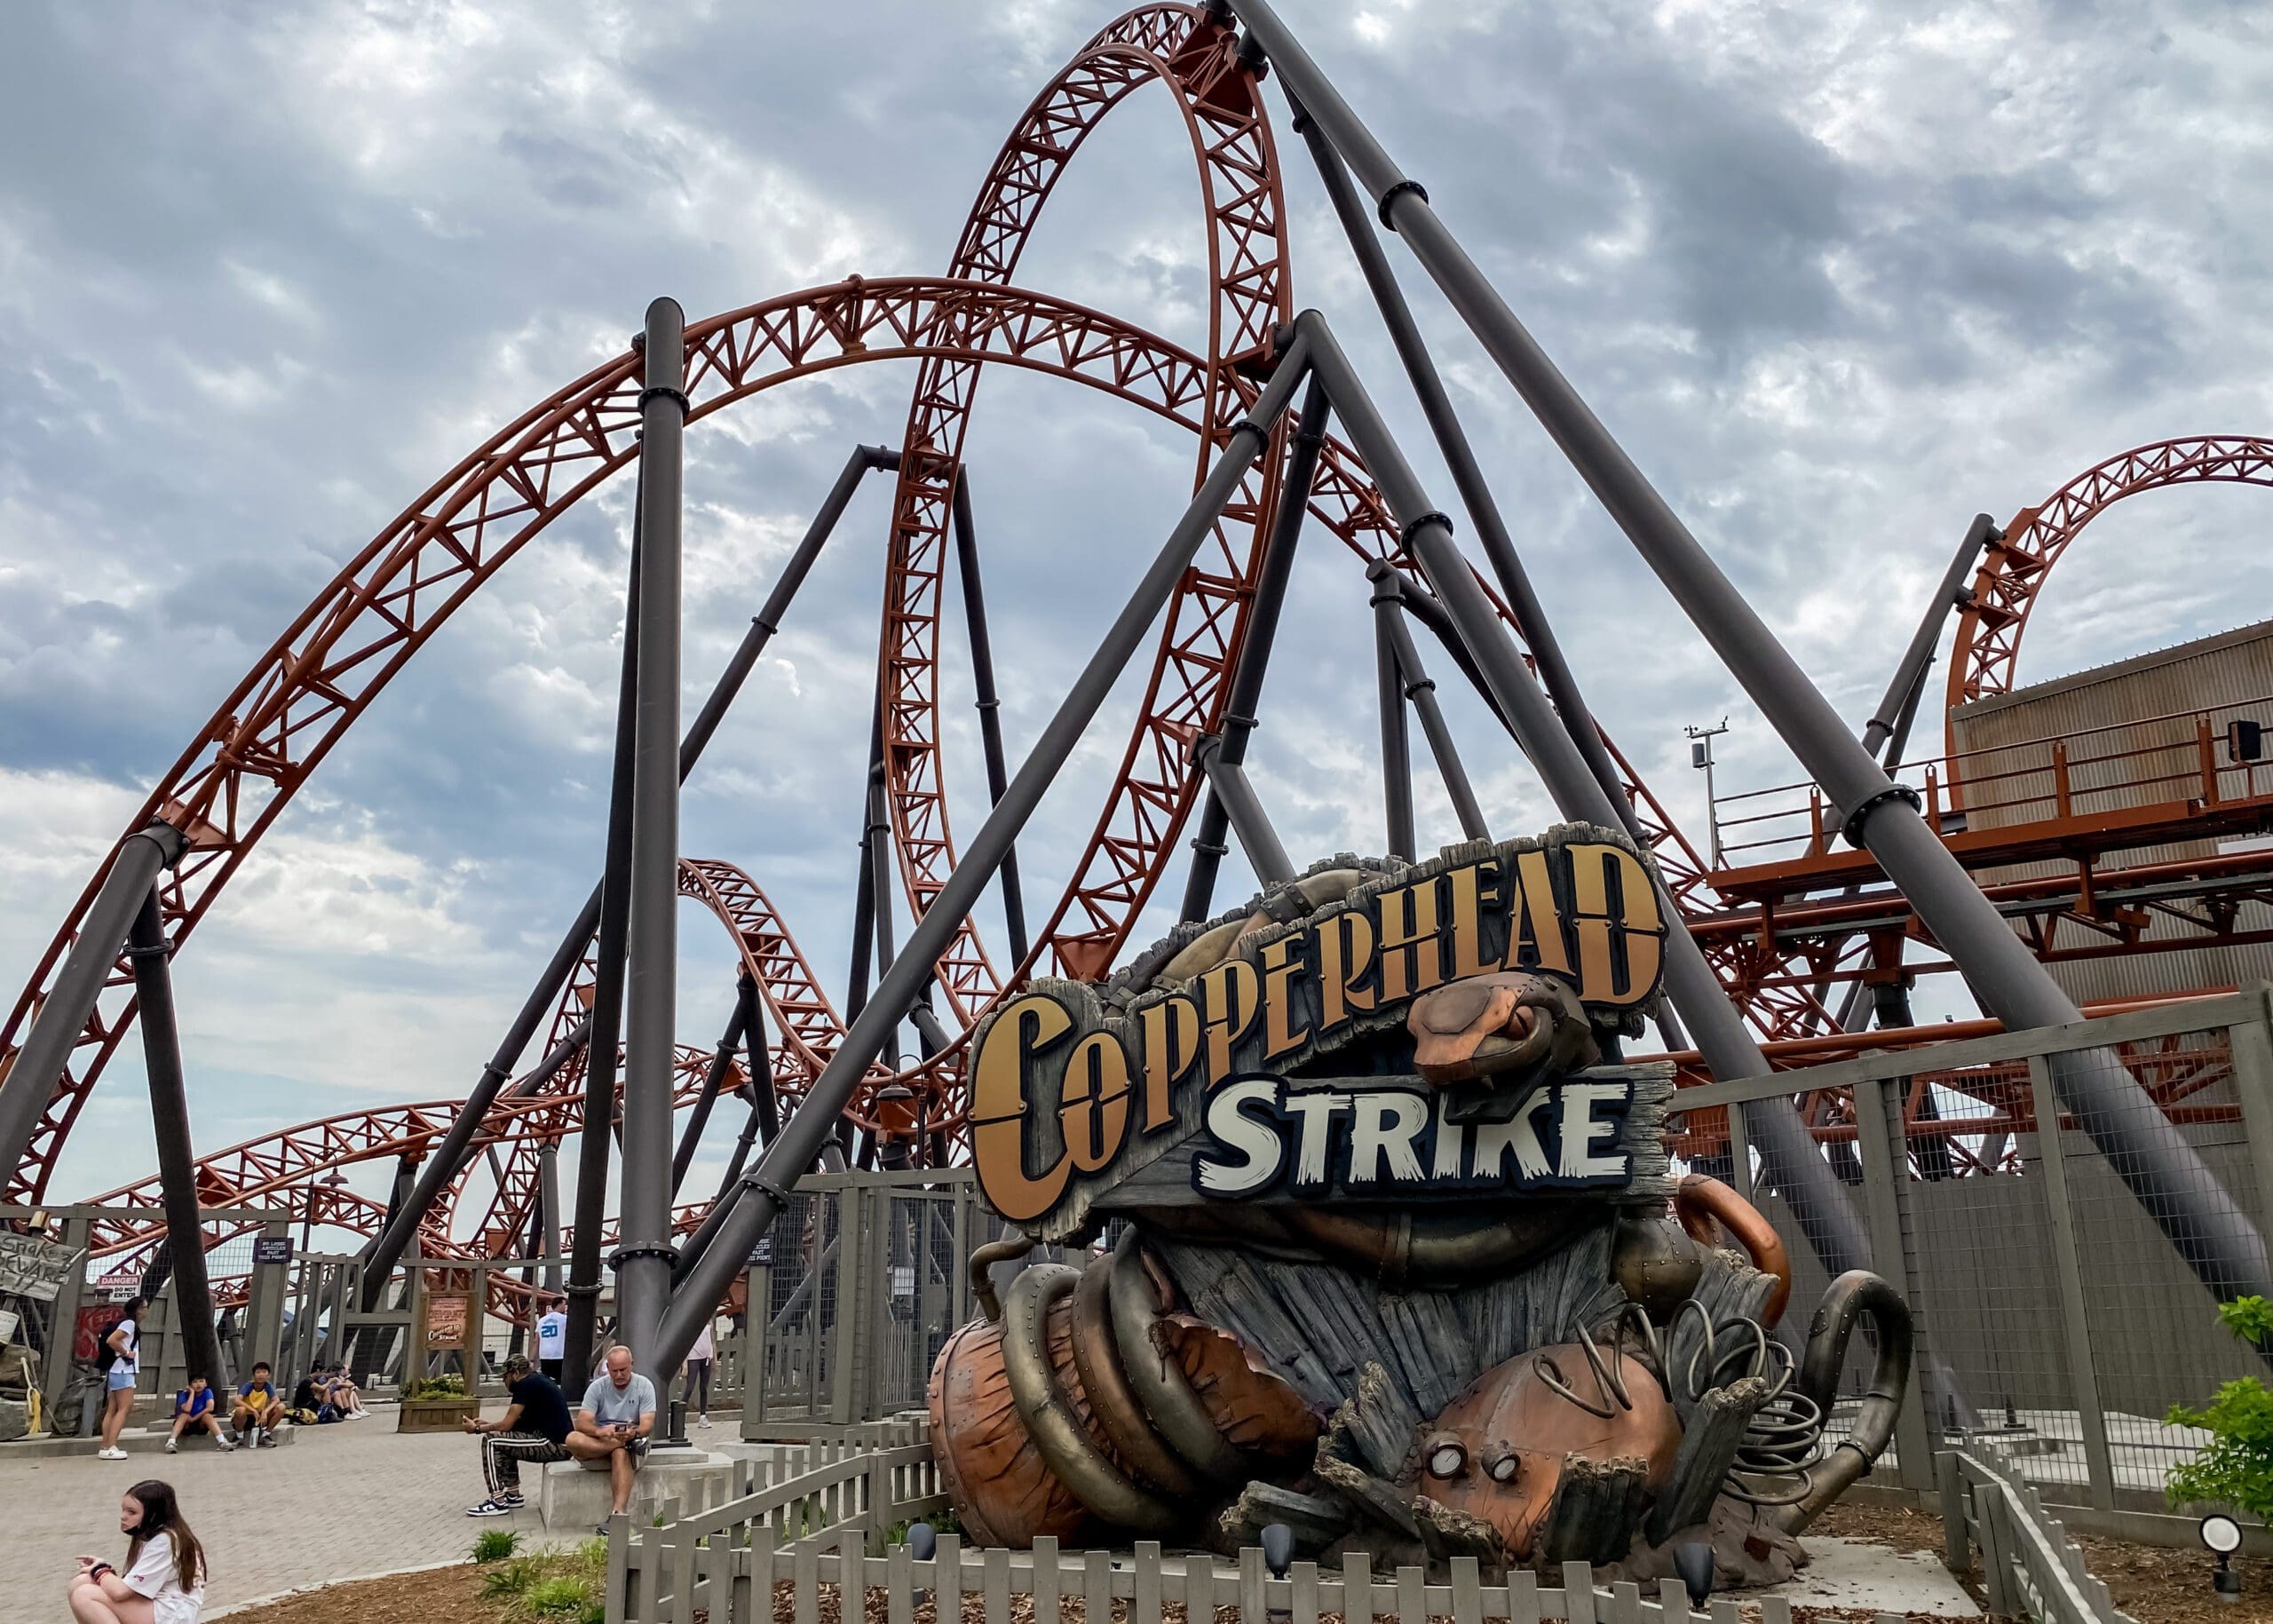 Rollercoasters at Carowinds